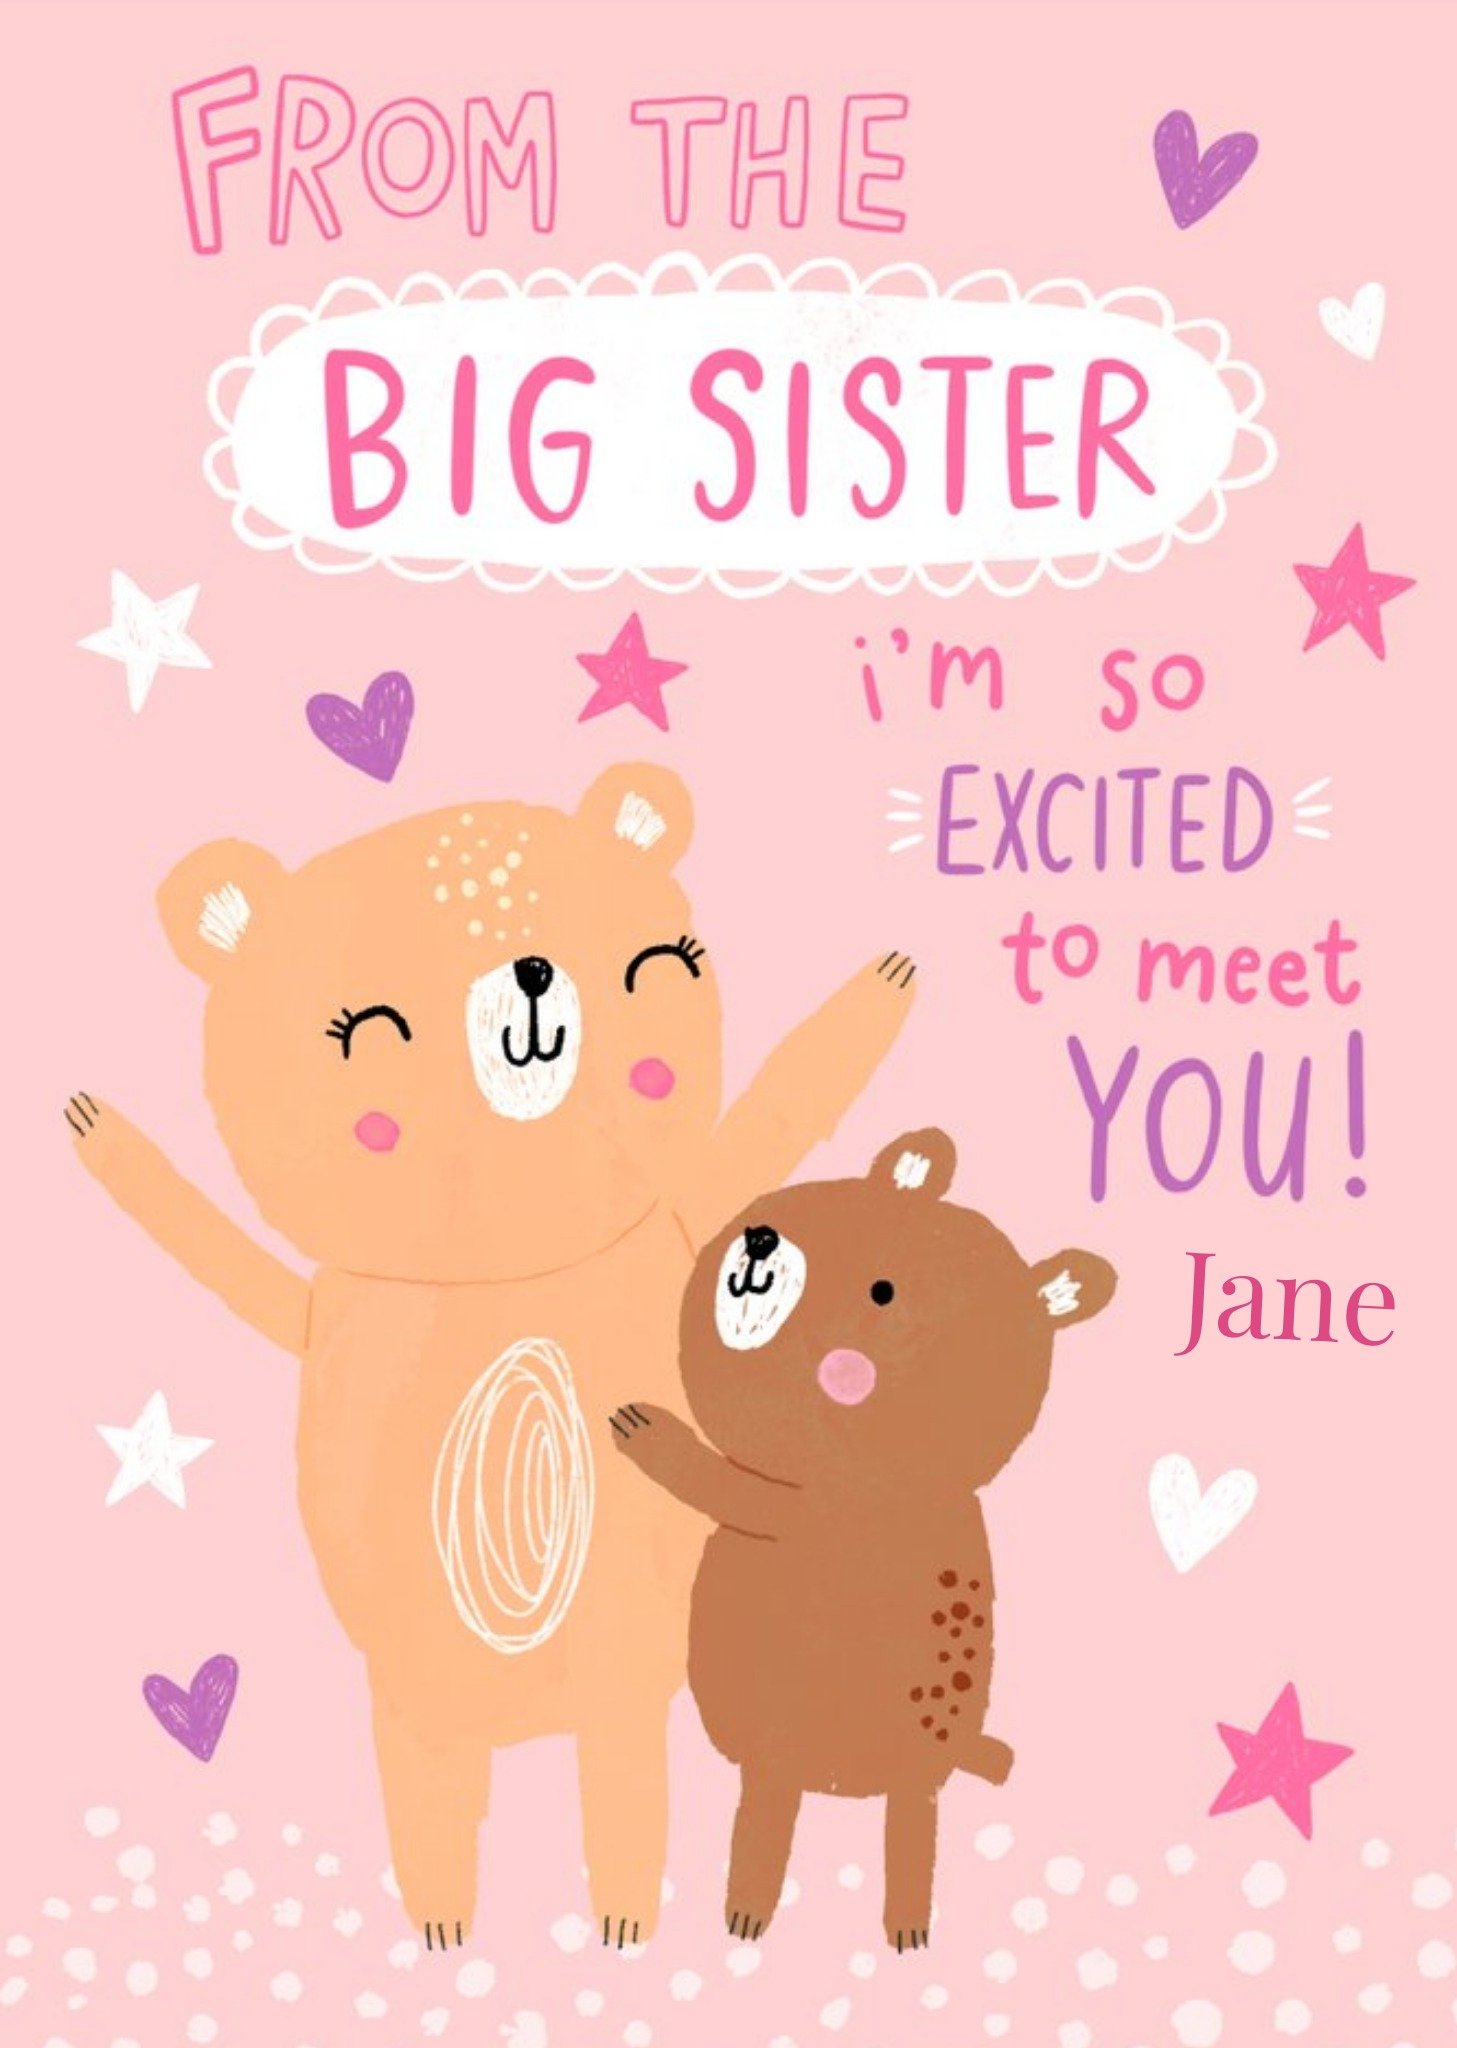 Moonpig Illustration Of Two Bears Surrounded By Hearts And Stars From The Big Sister New Baby Card, 